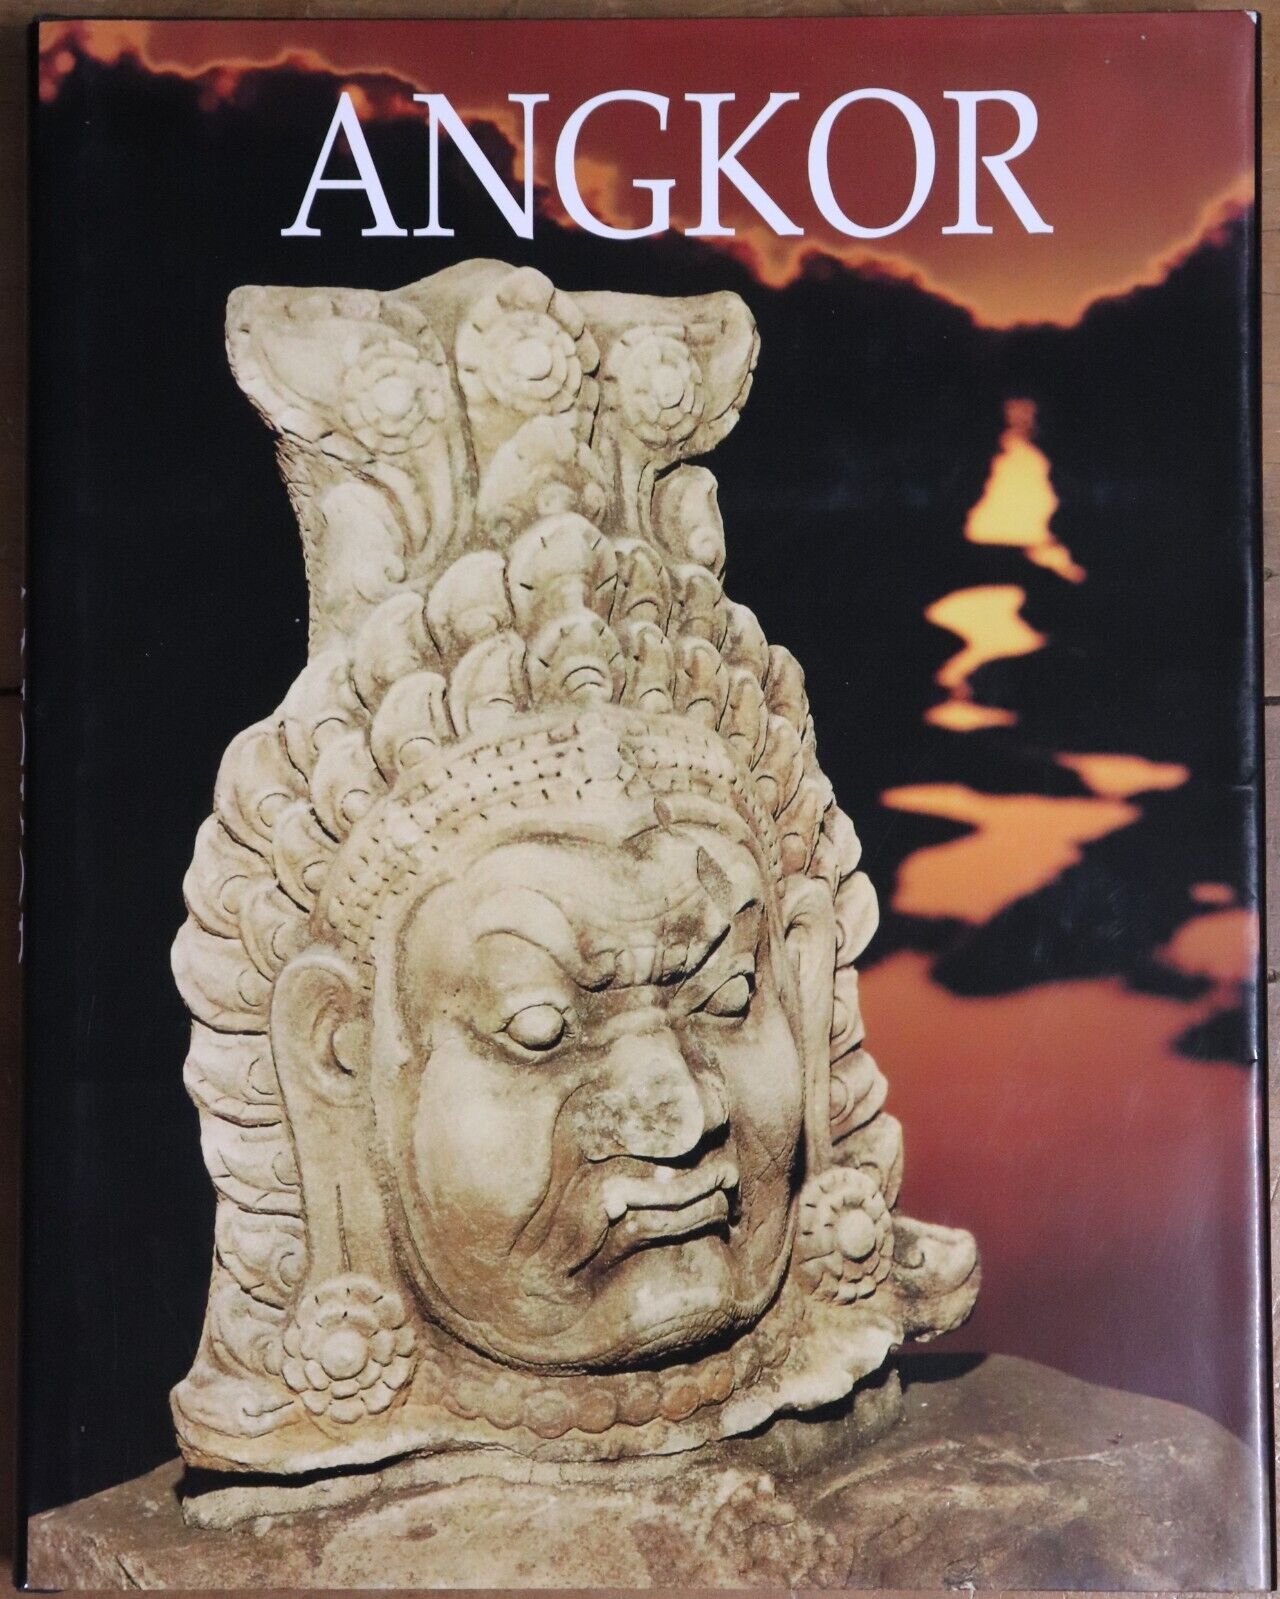 Angkor by Claude Jacques - 1999 - Large Print History & Architecture Book